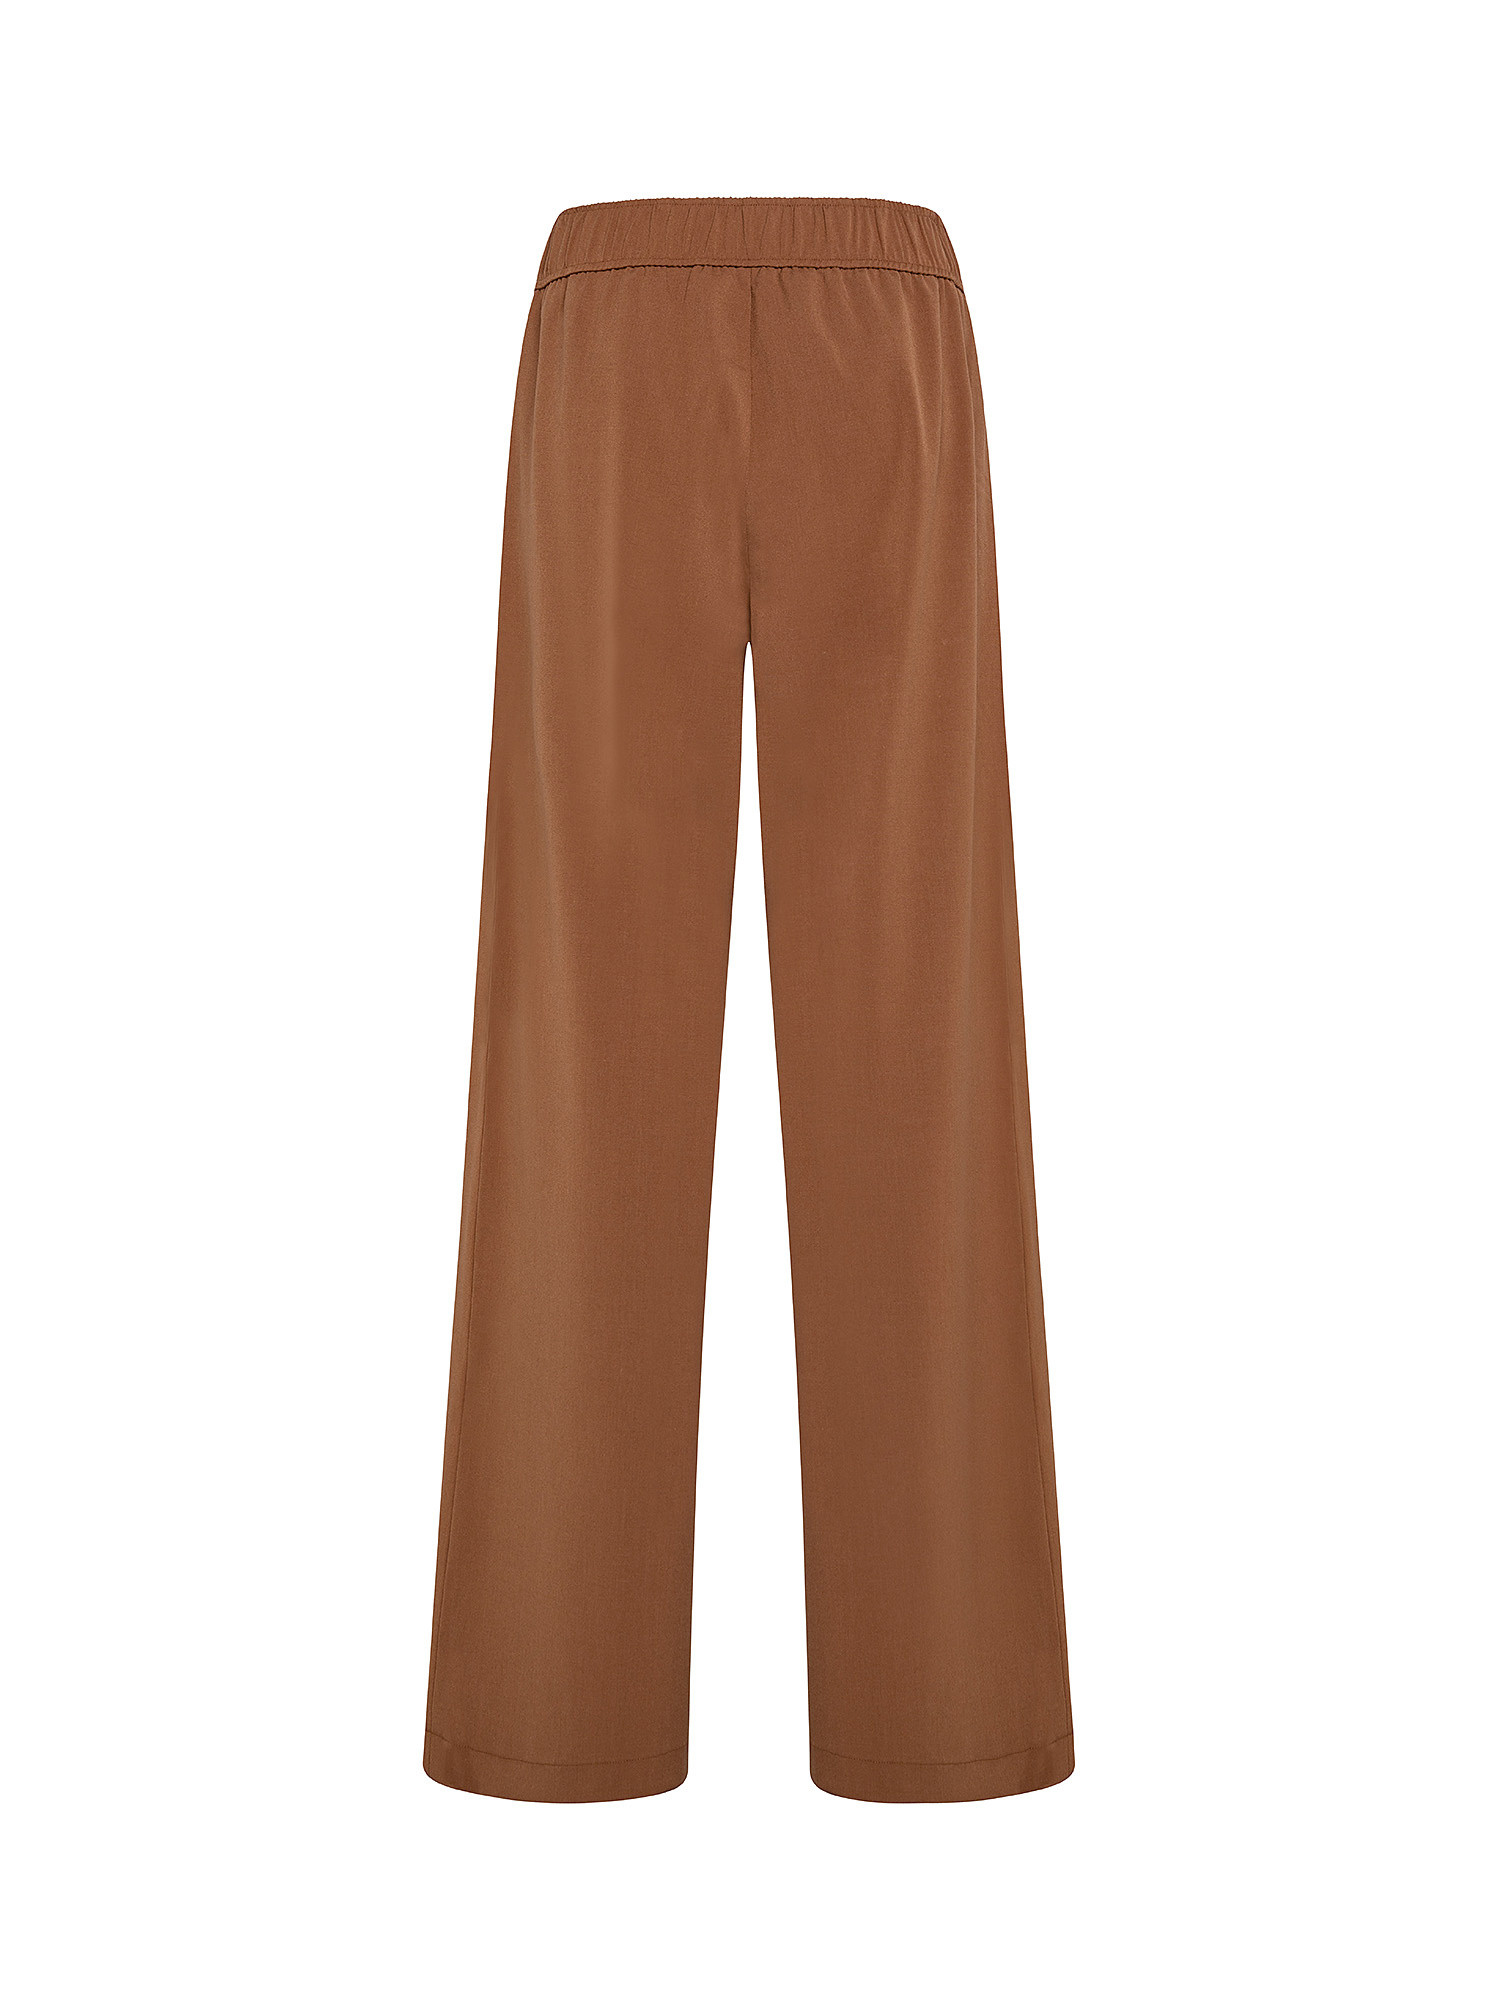 Trousers with wide leg, Brown, large image number 1